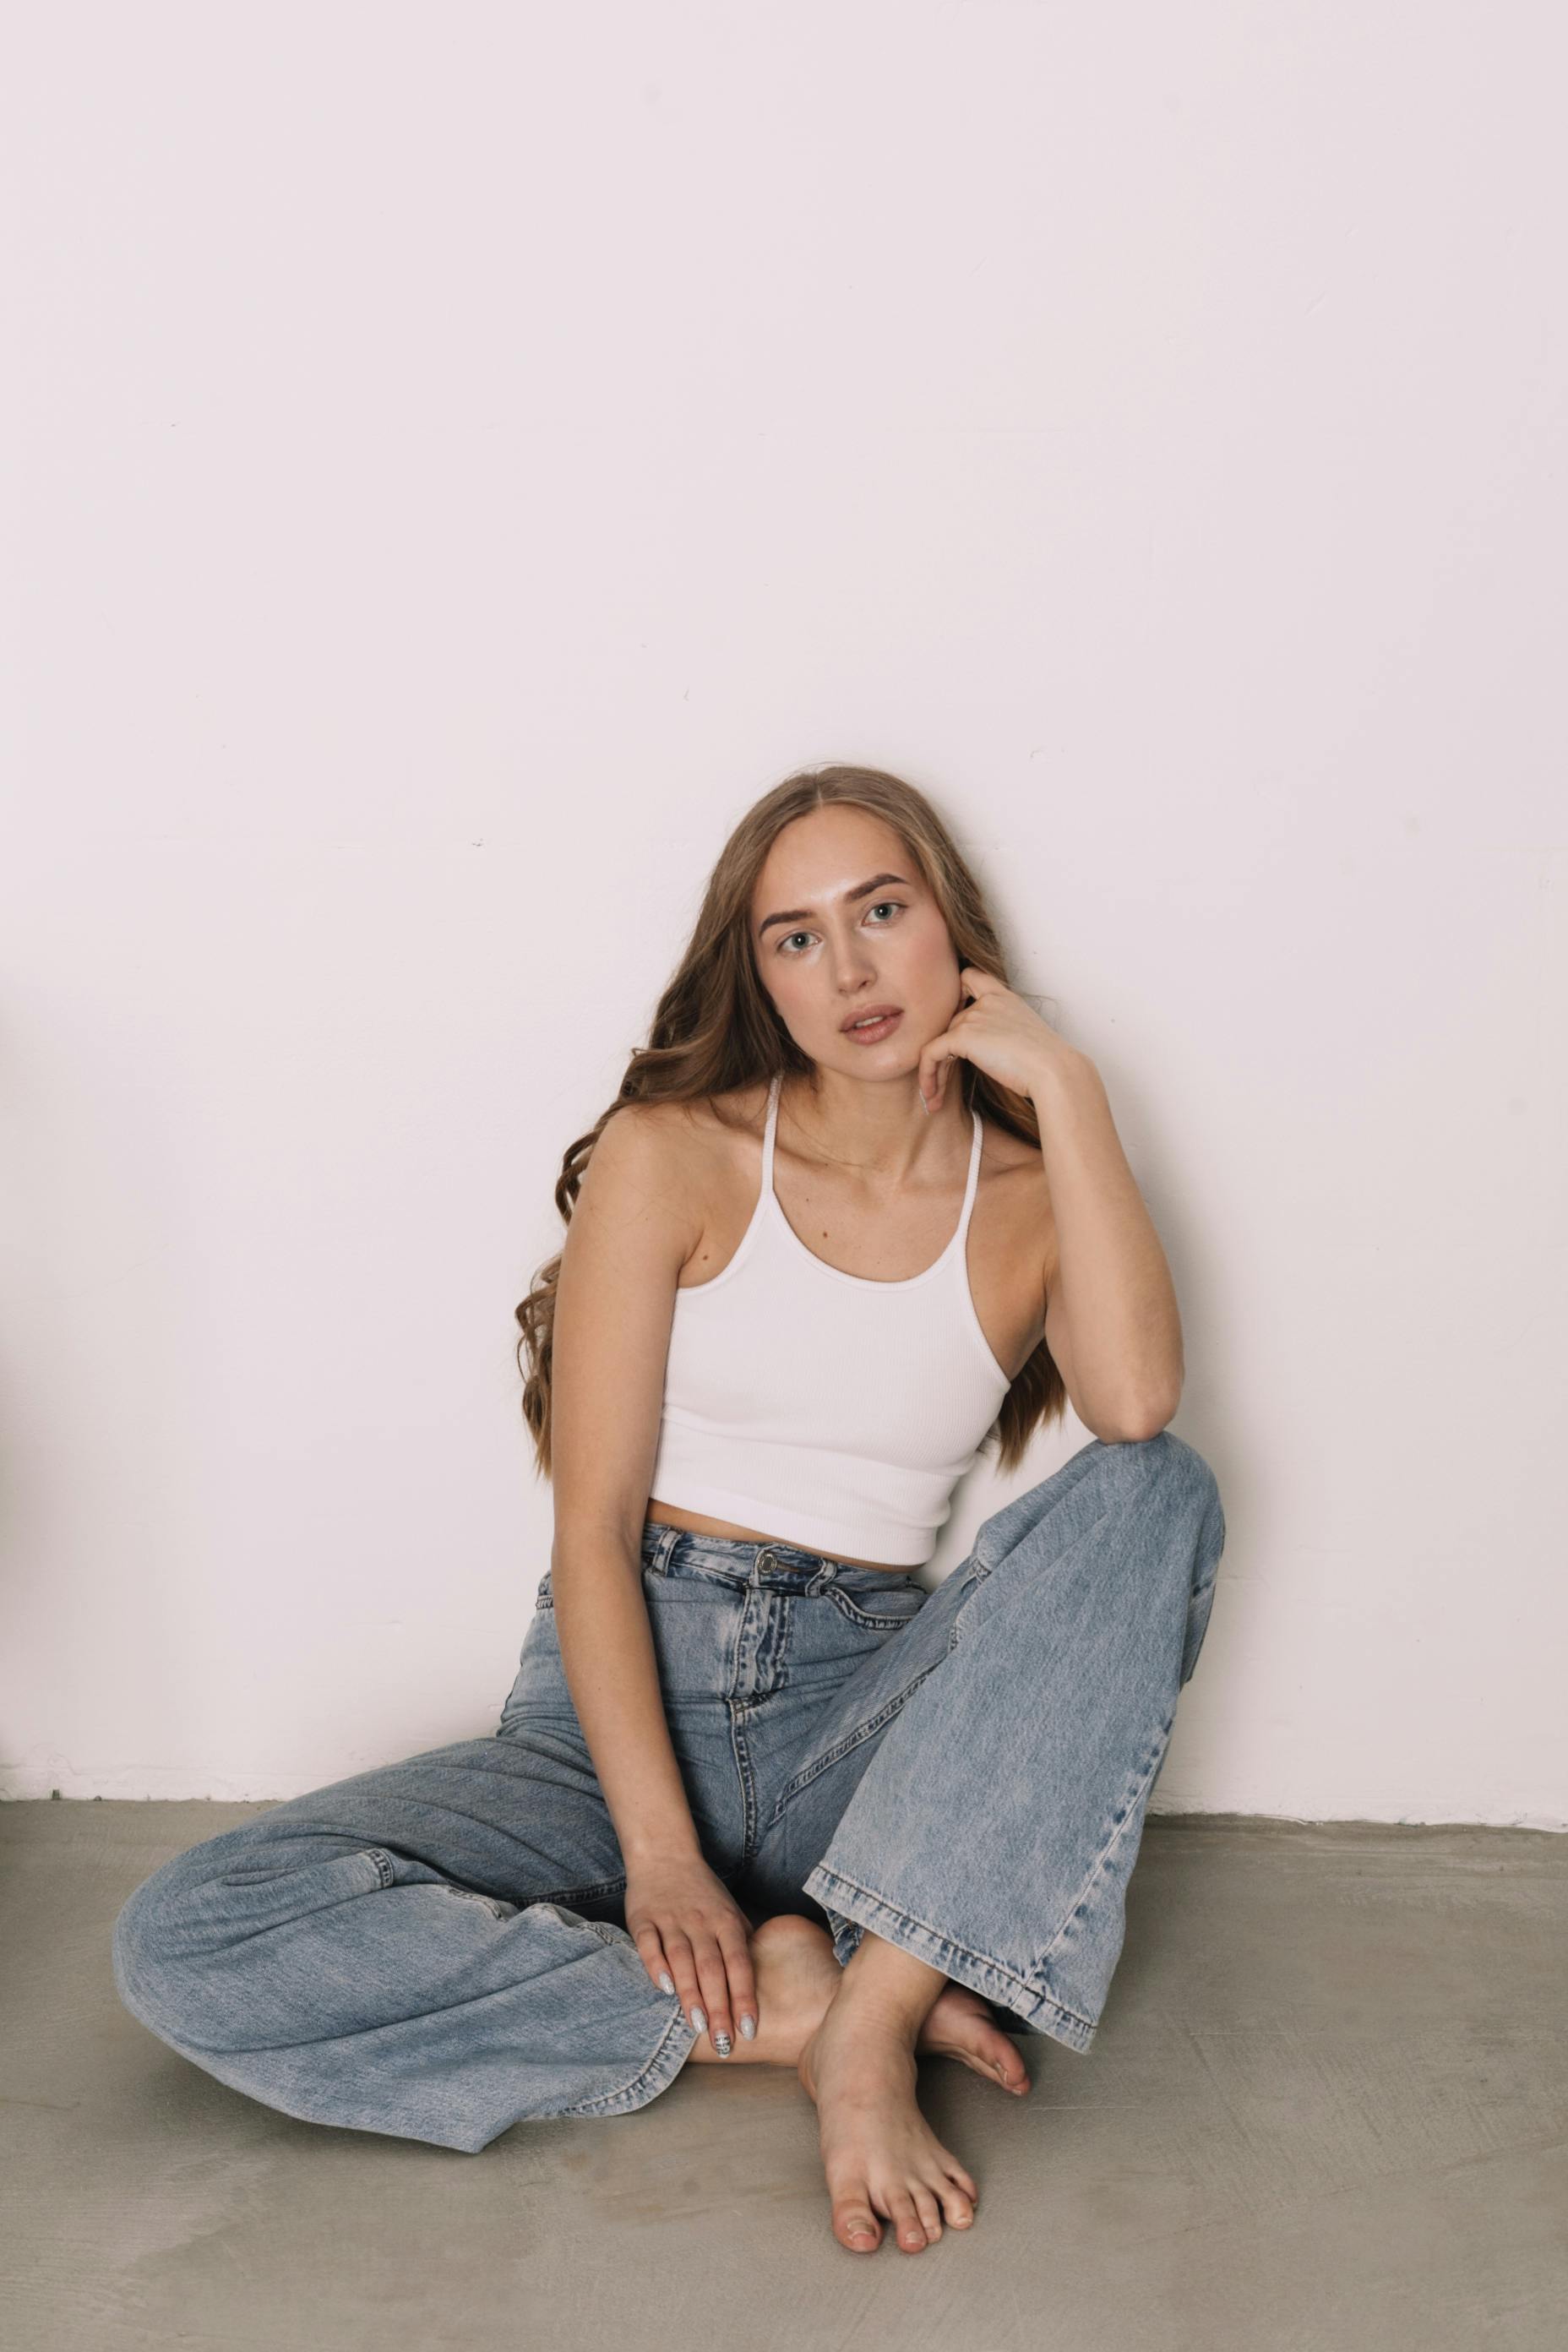 A Woman Wearing a White Tank Top and Denim Jeans · Free Stock Photo